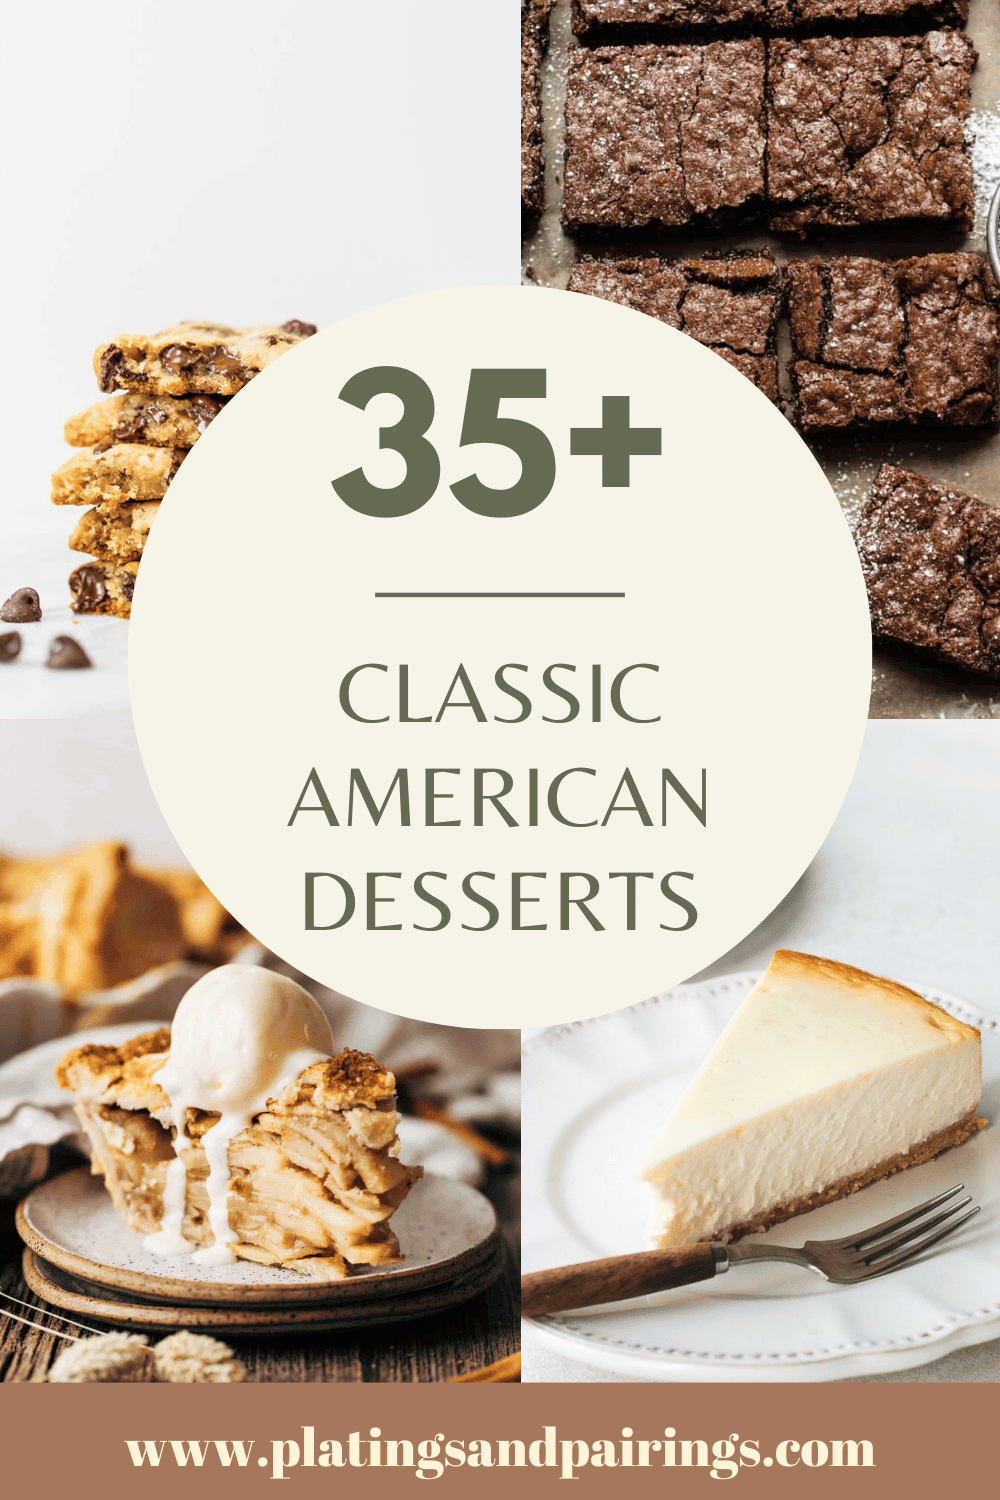 Collage of American deserts with text overlay.